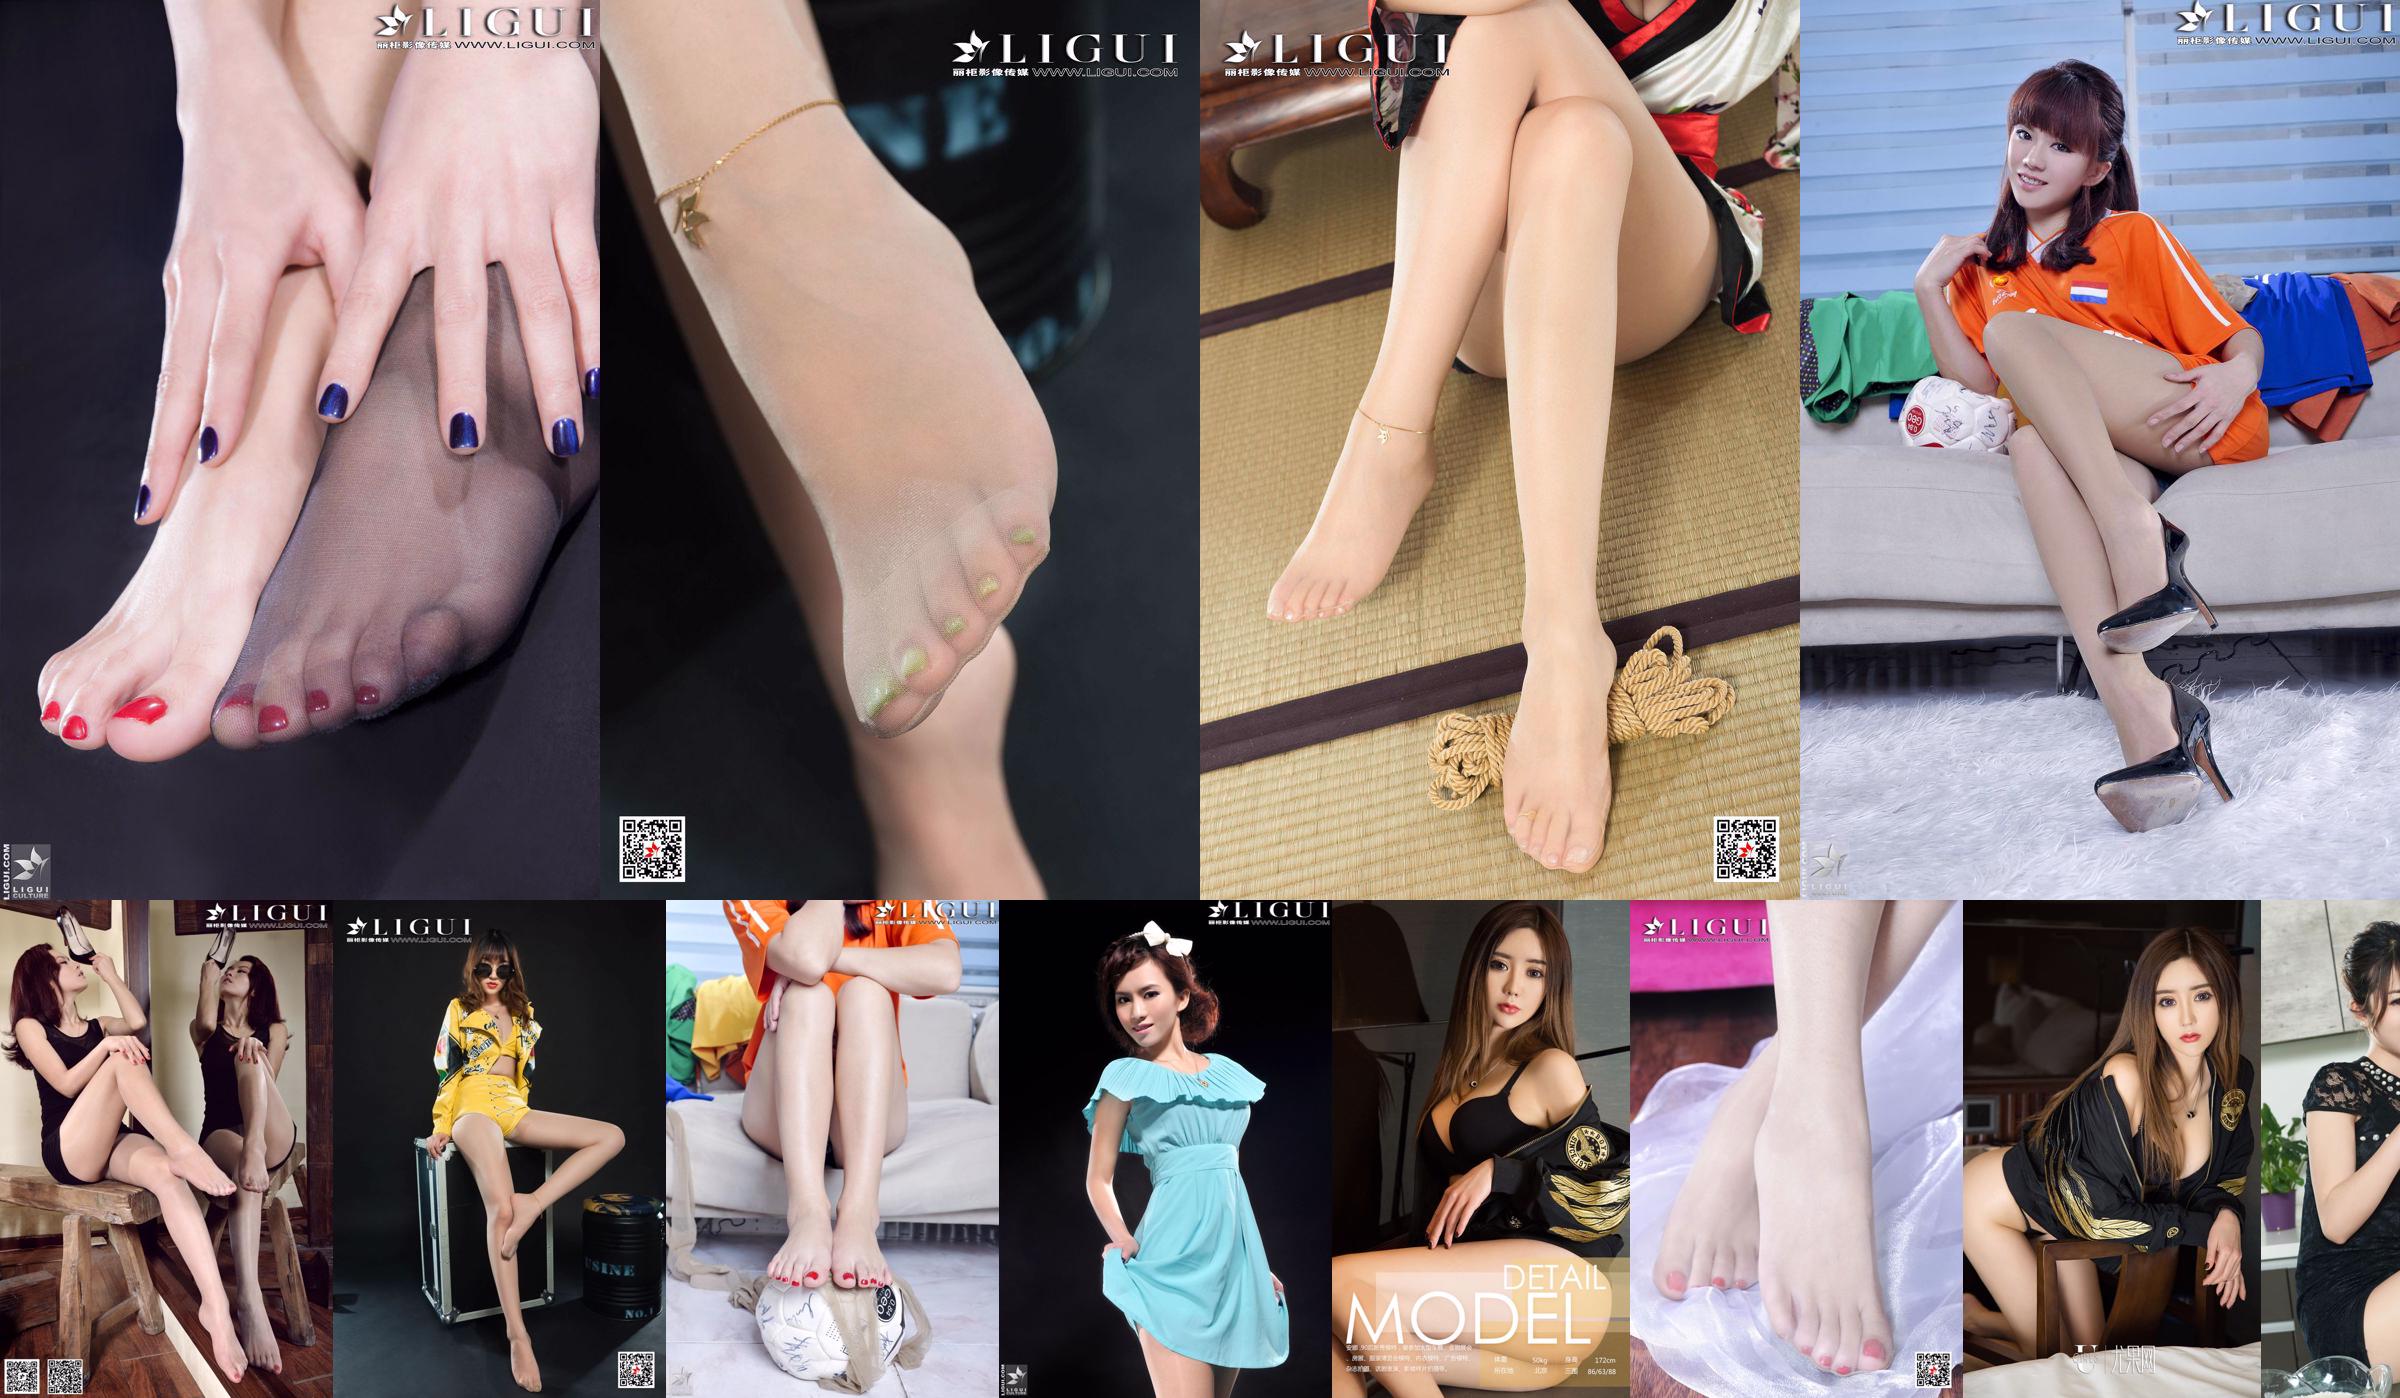 Model Anna "Ladies Rope Art" Complete Works [丽柜美束LiGui] Beautiful legs and silk feet photo pictures No.a12d31 Page 3